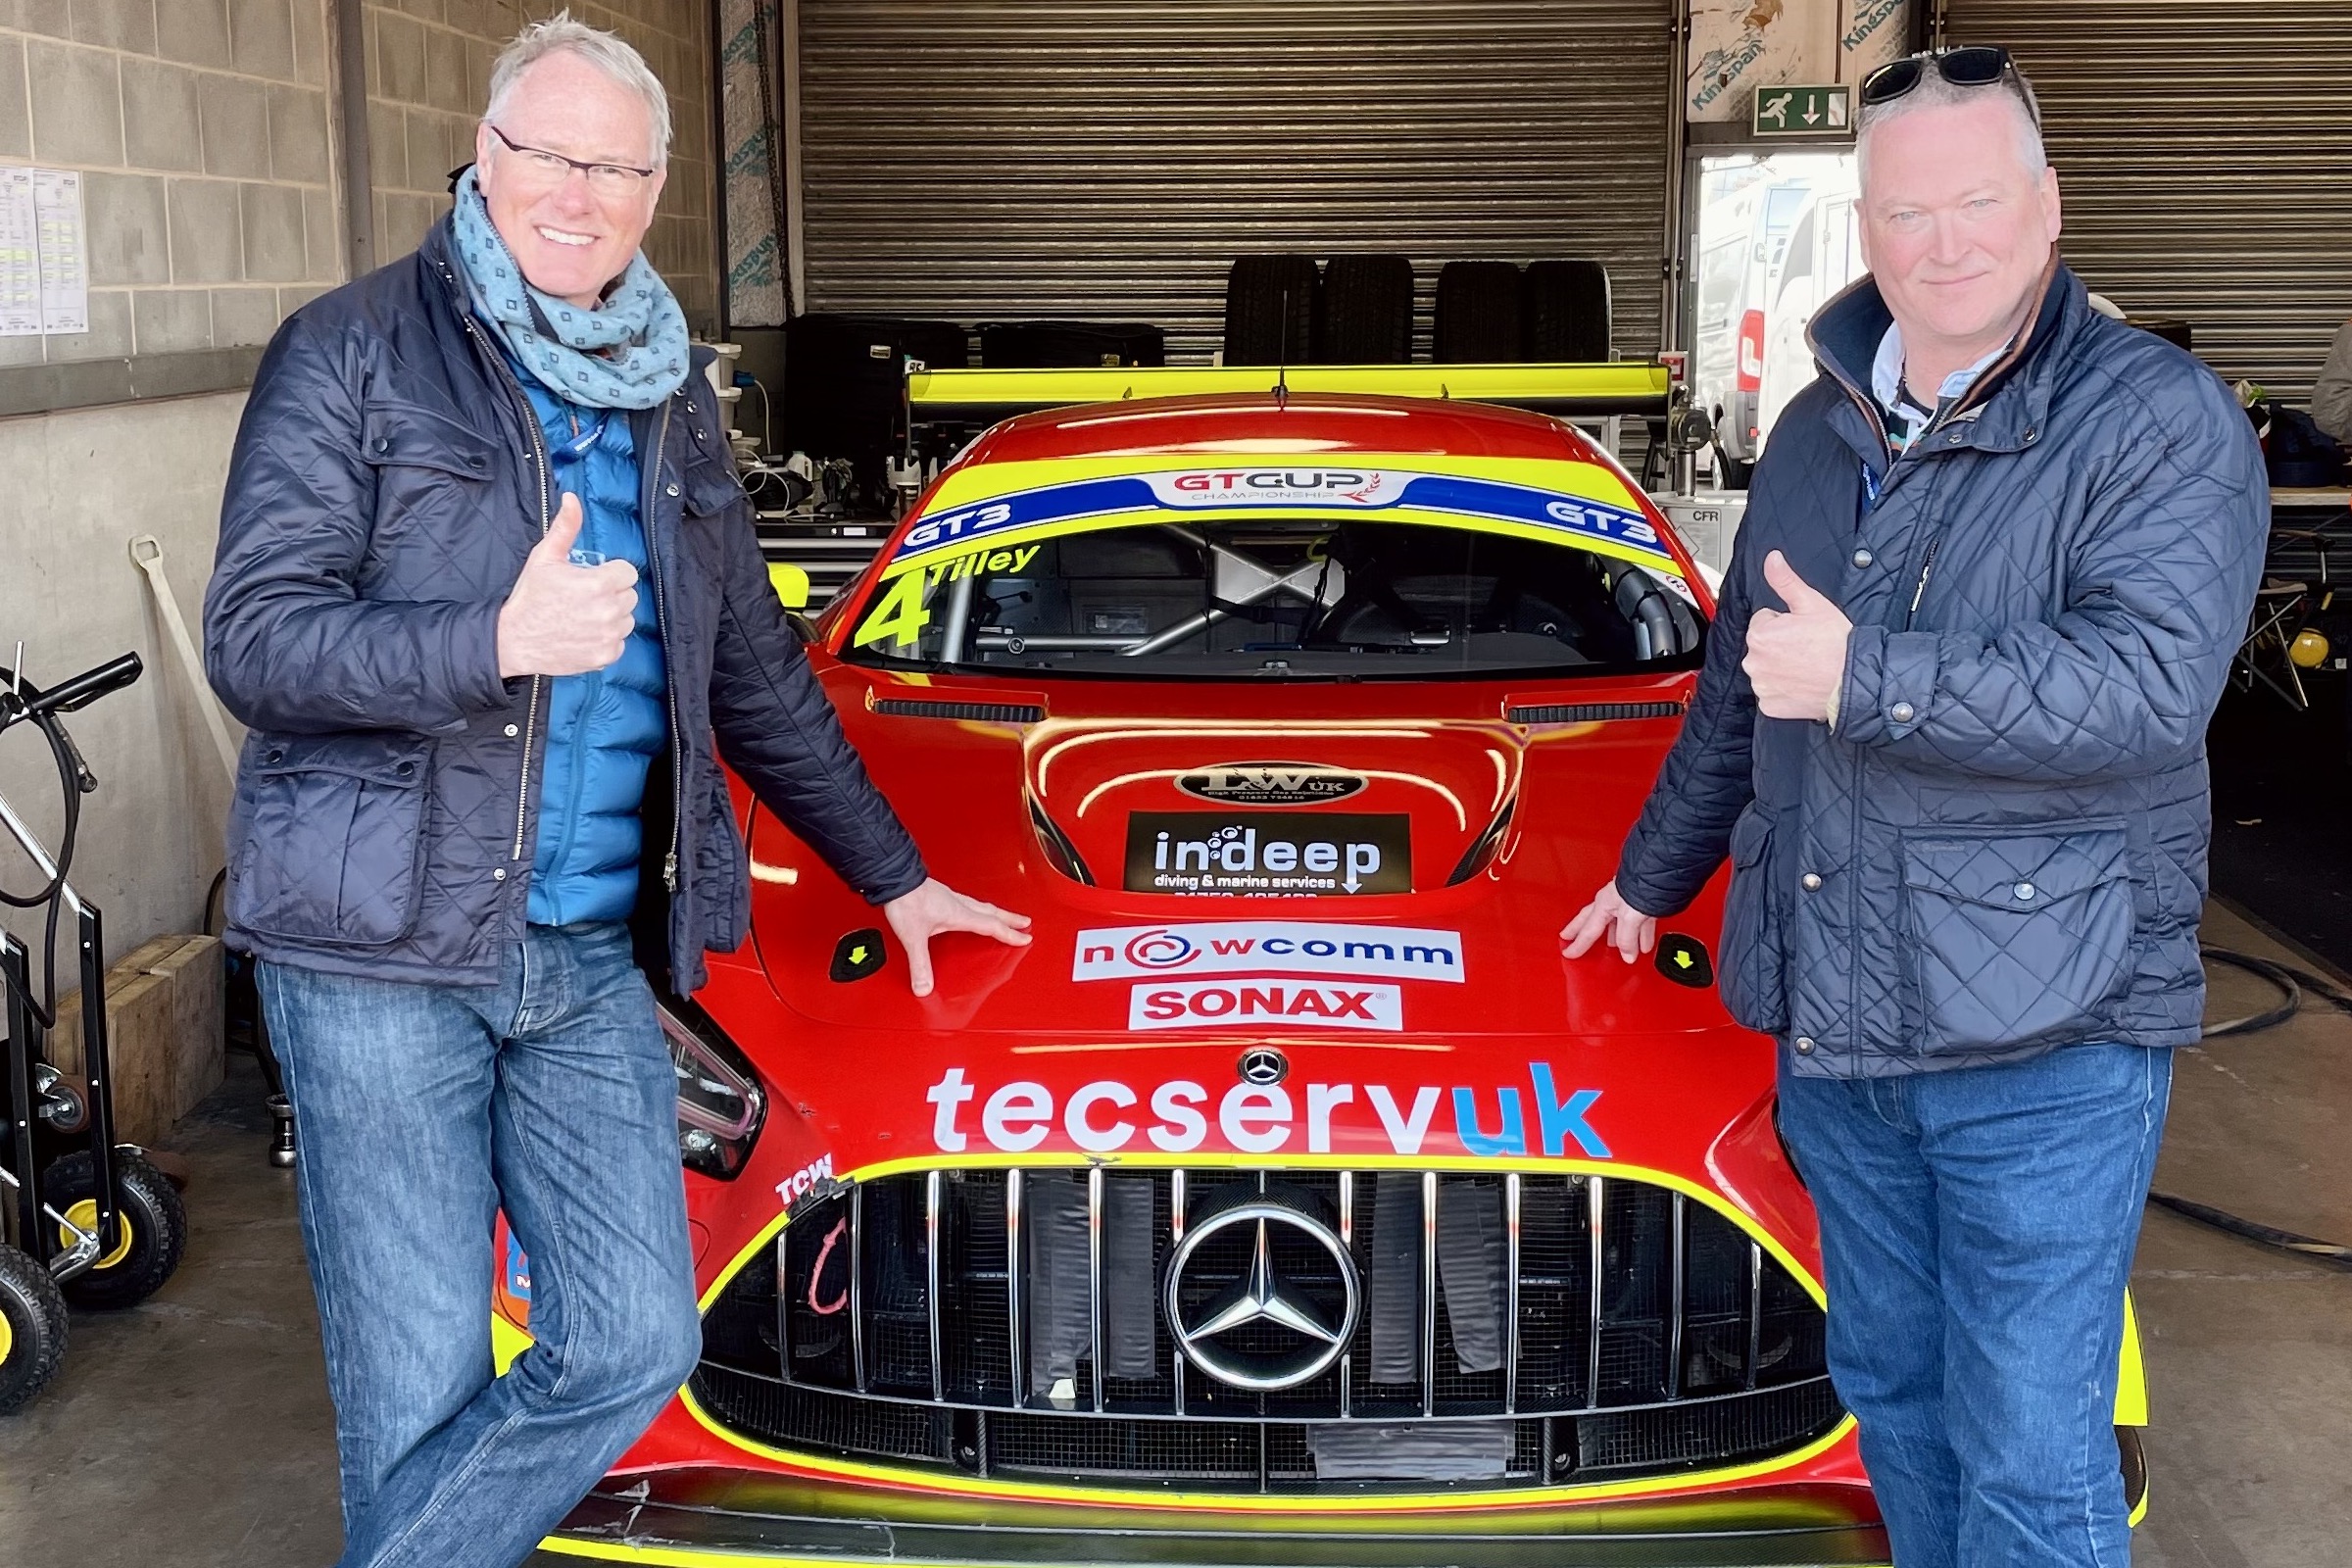 Sponsorship deal puts IT firm in driving seat